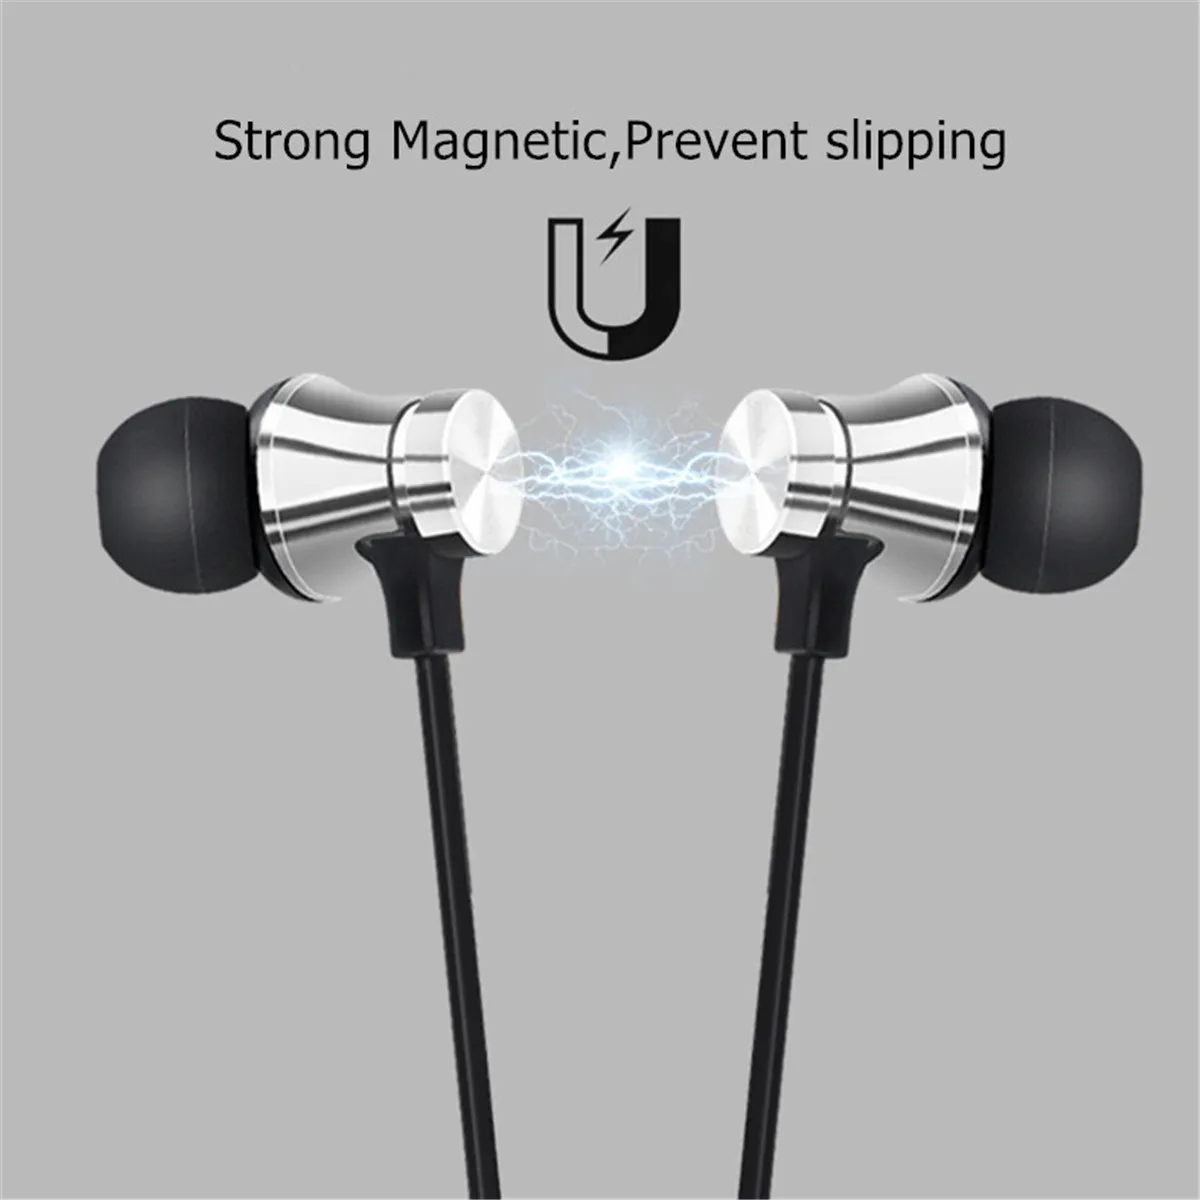 Bluetooth V4.2 Wireless Stereo Earphone Sport Headset For iPhone X XS 7 8 Samsung S8 S9 S10 Xiaomi 9 Waterproof Earbuds With Mic